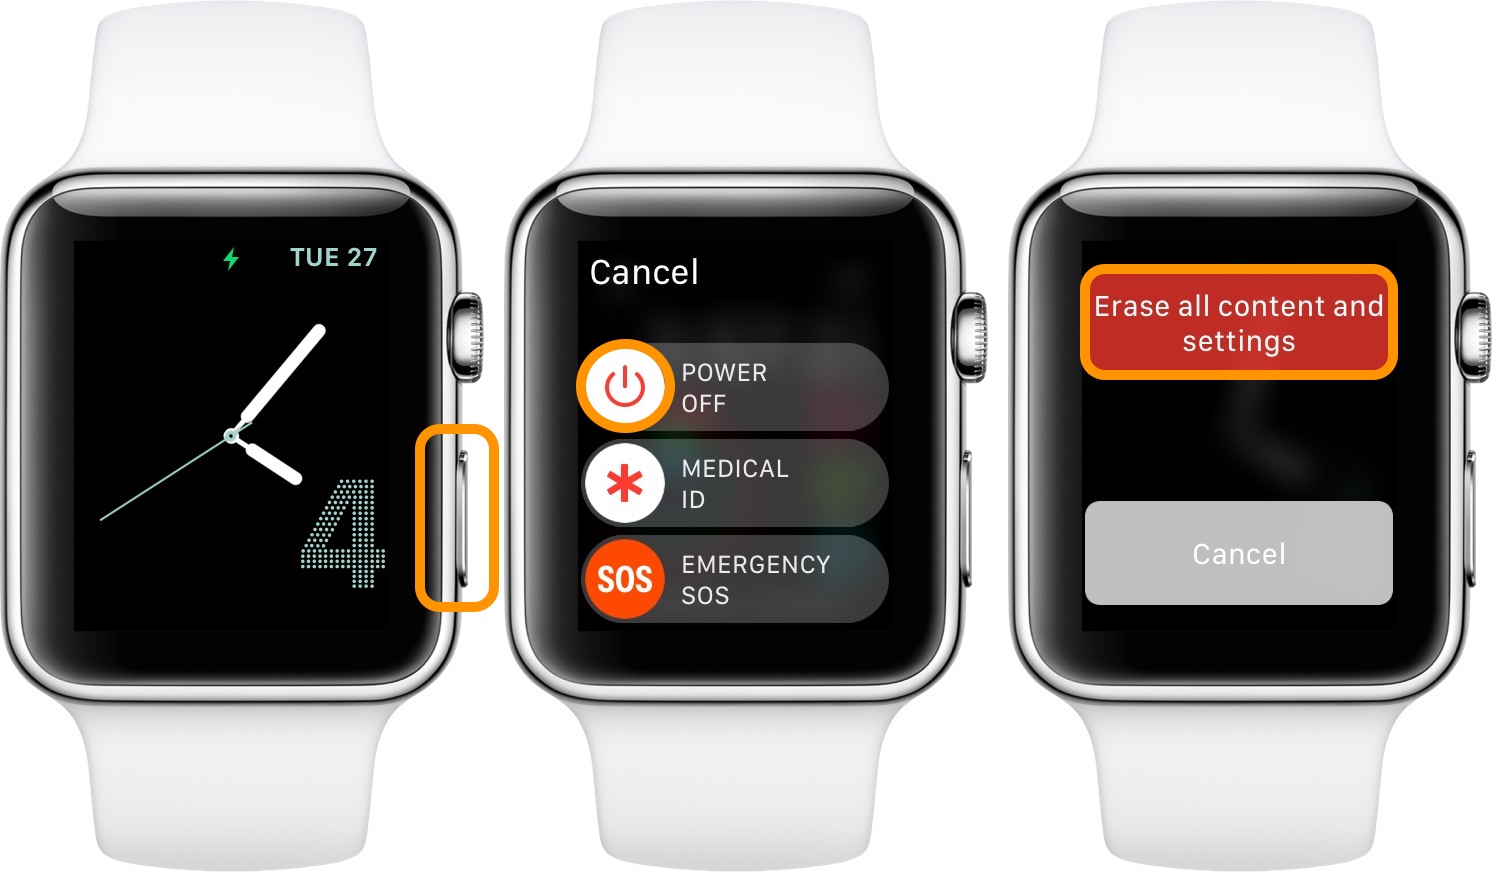 How to unpair Apple Watch without iPhone